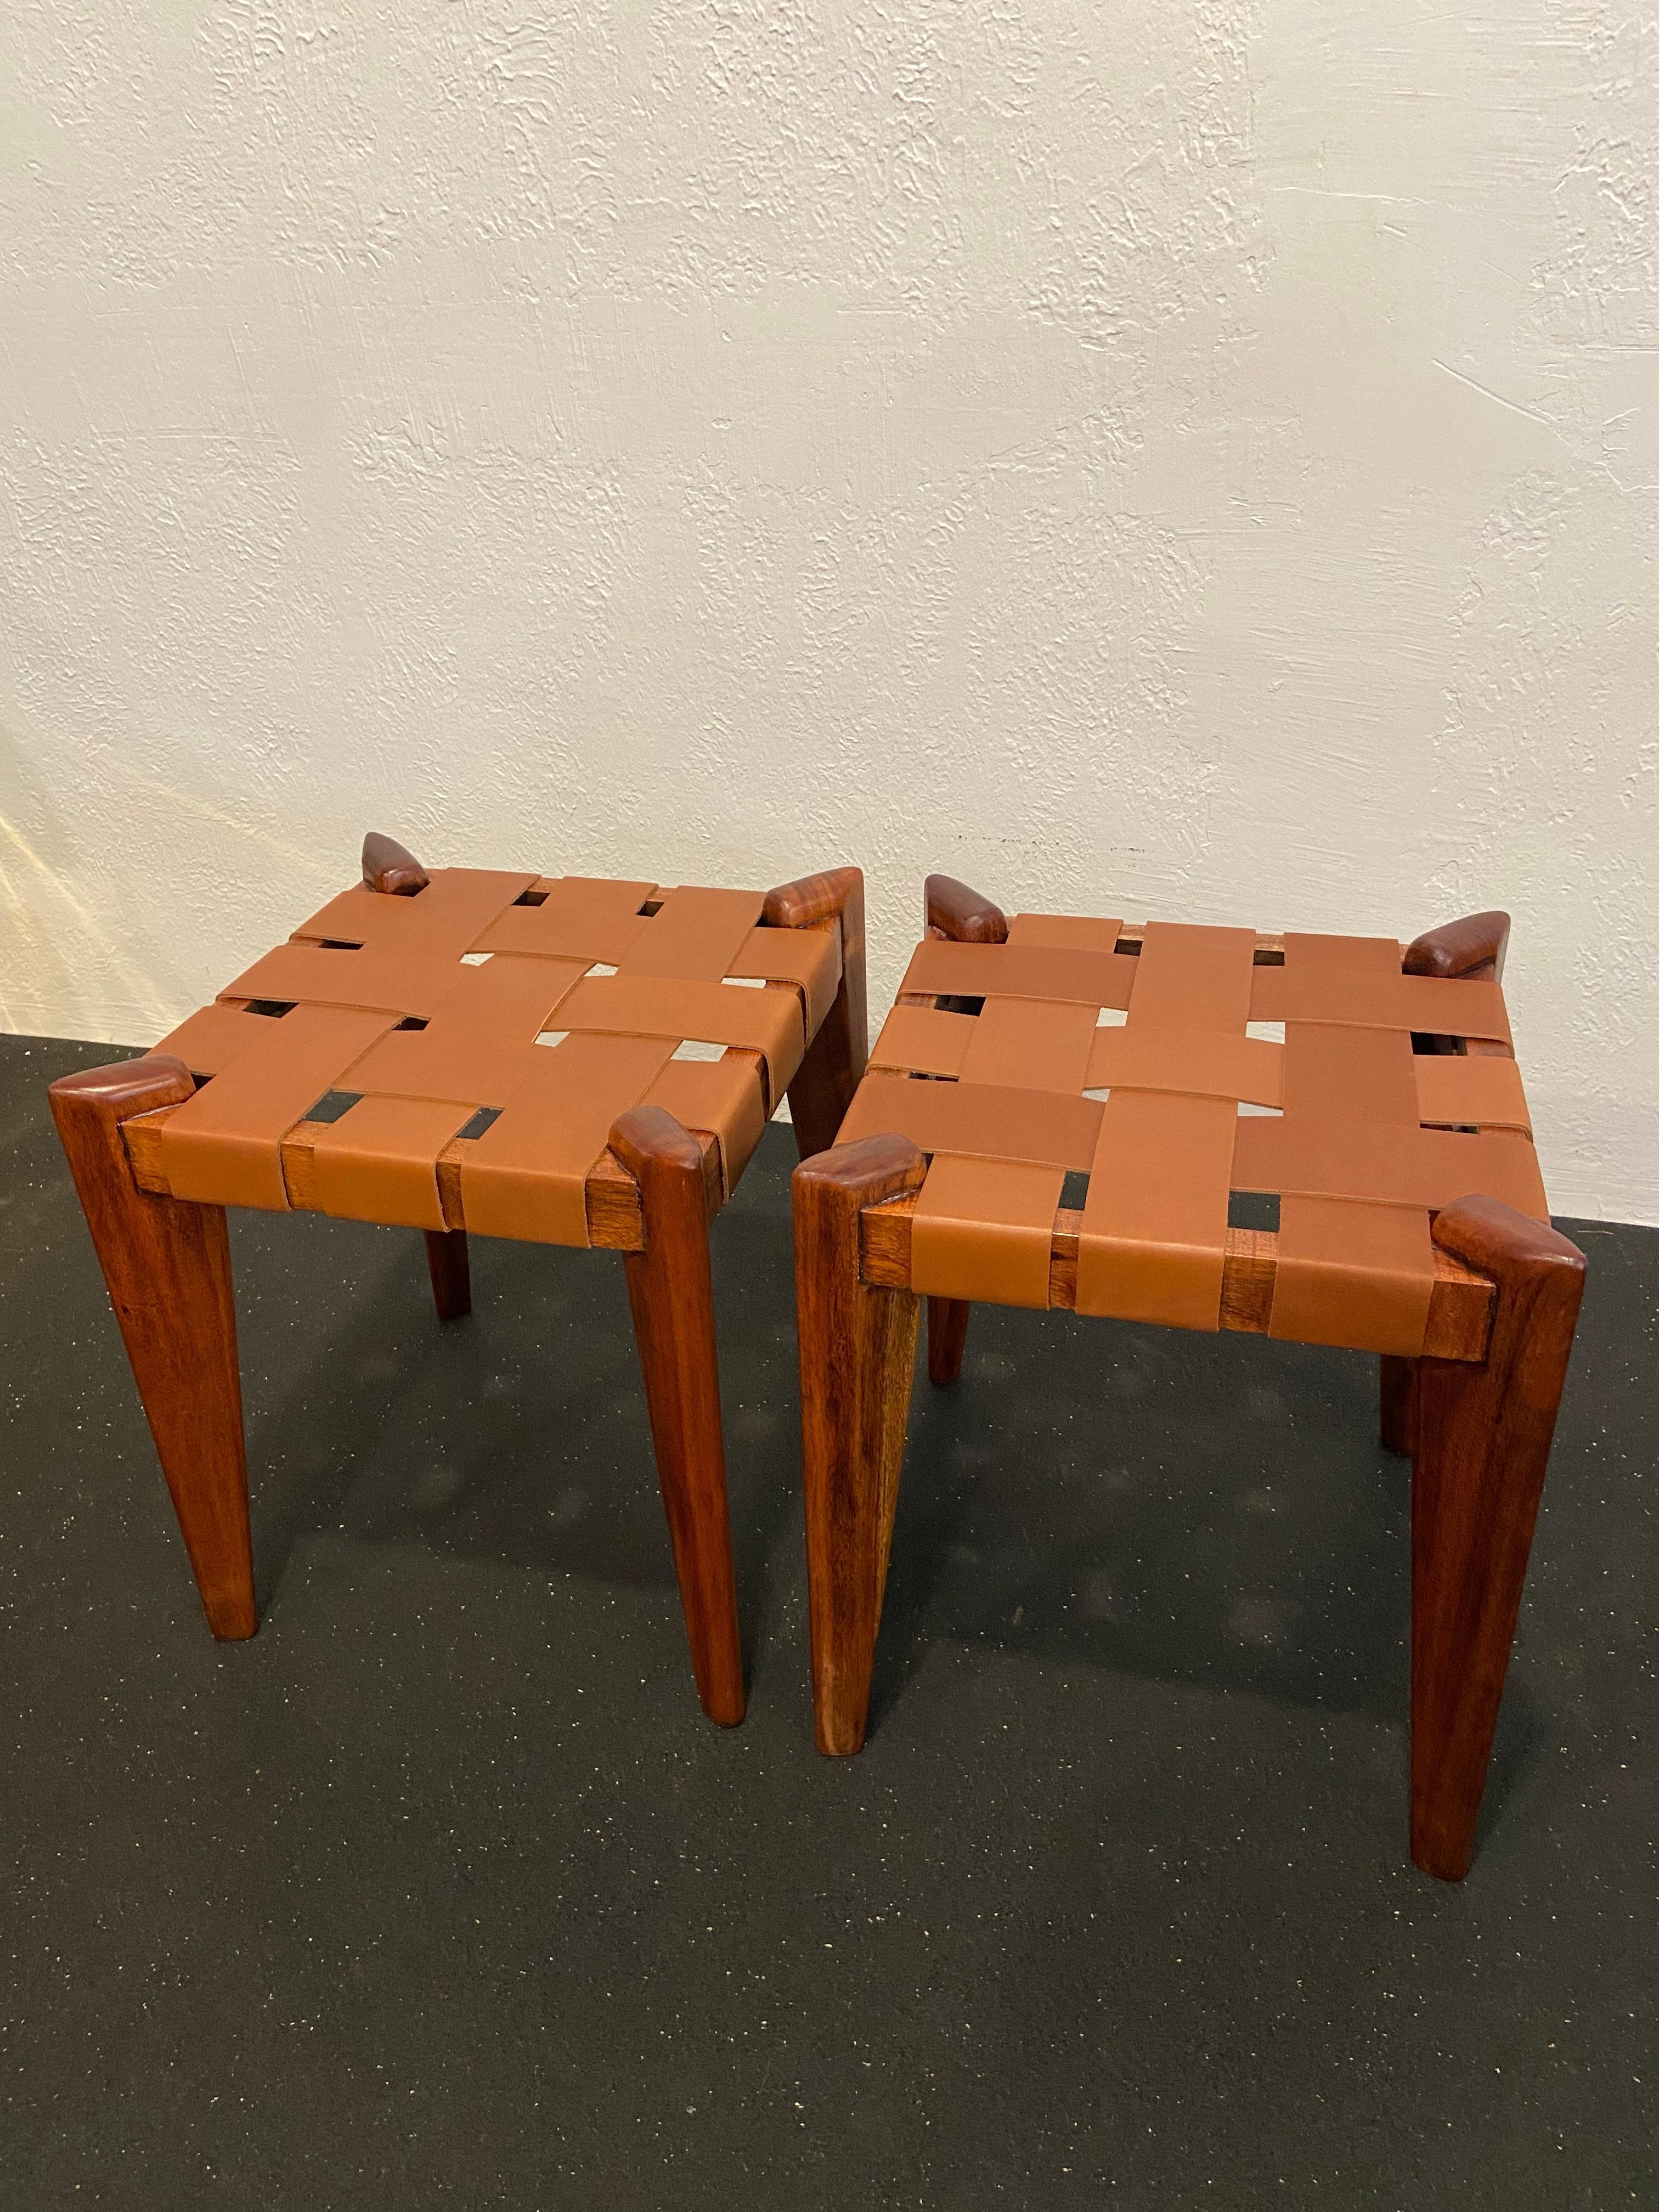 Edmond Spence Woven Leather Stools-a Pair For Sale 1